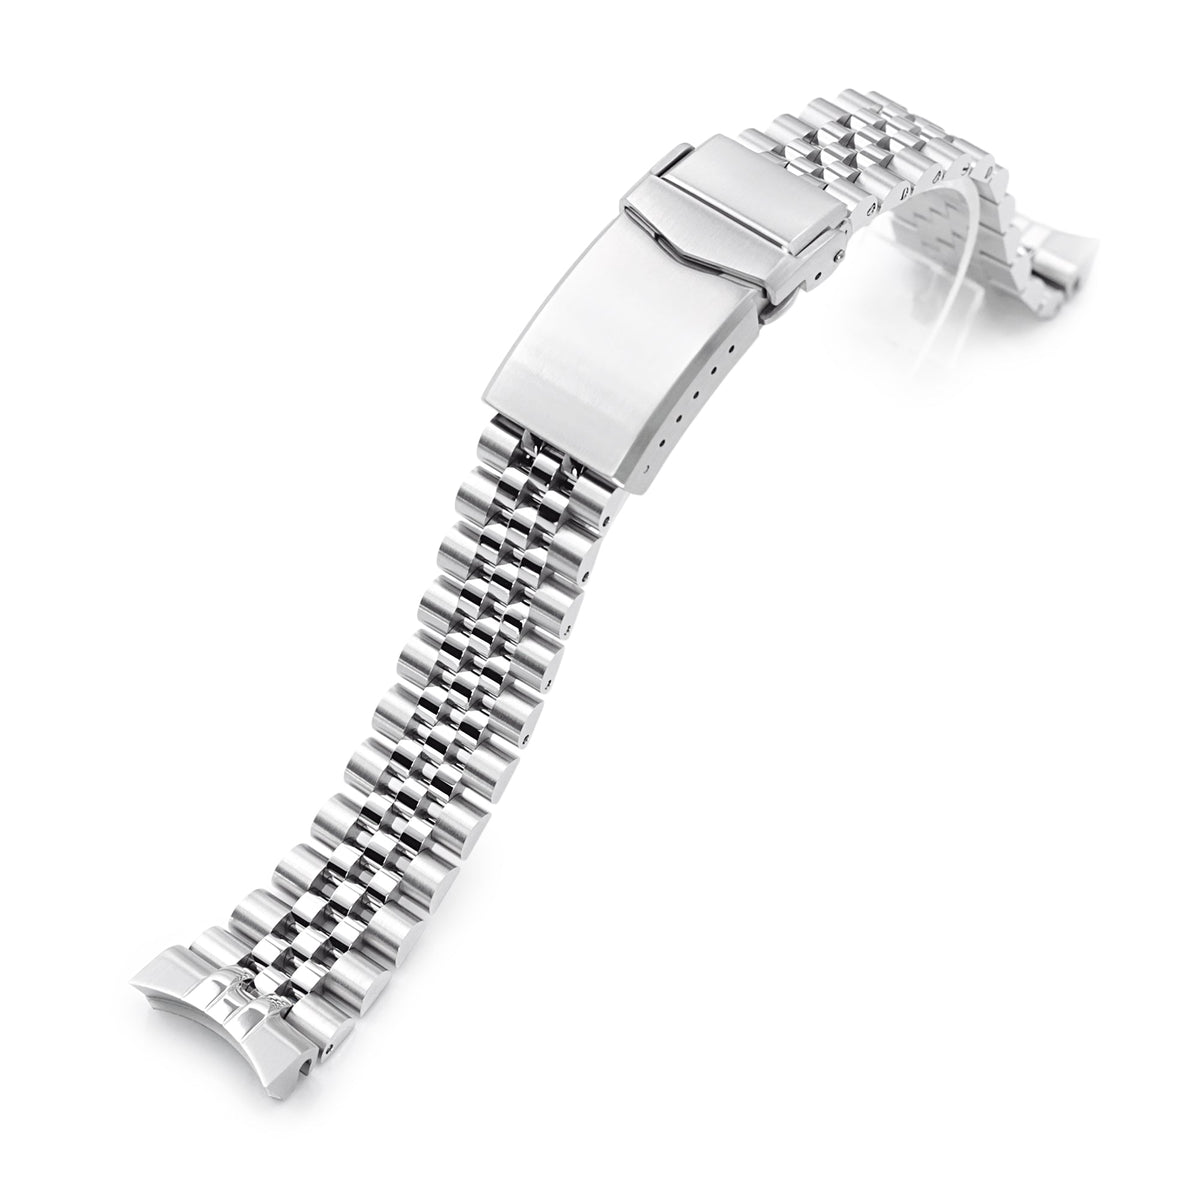 19mm Super-JUB II Watch Band for Grand Seiko 44GS SBGJ235, 316L Stainless Steel Brushed V-Clasp Strapcode Watch Bands